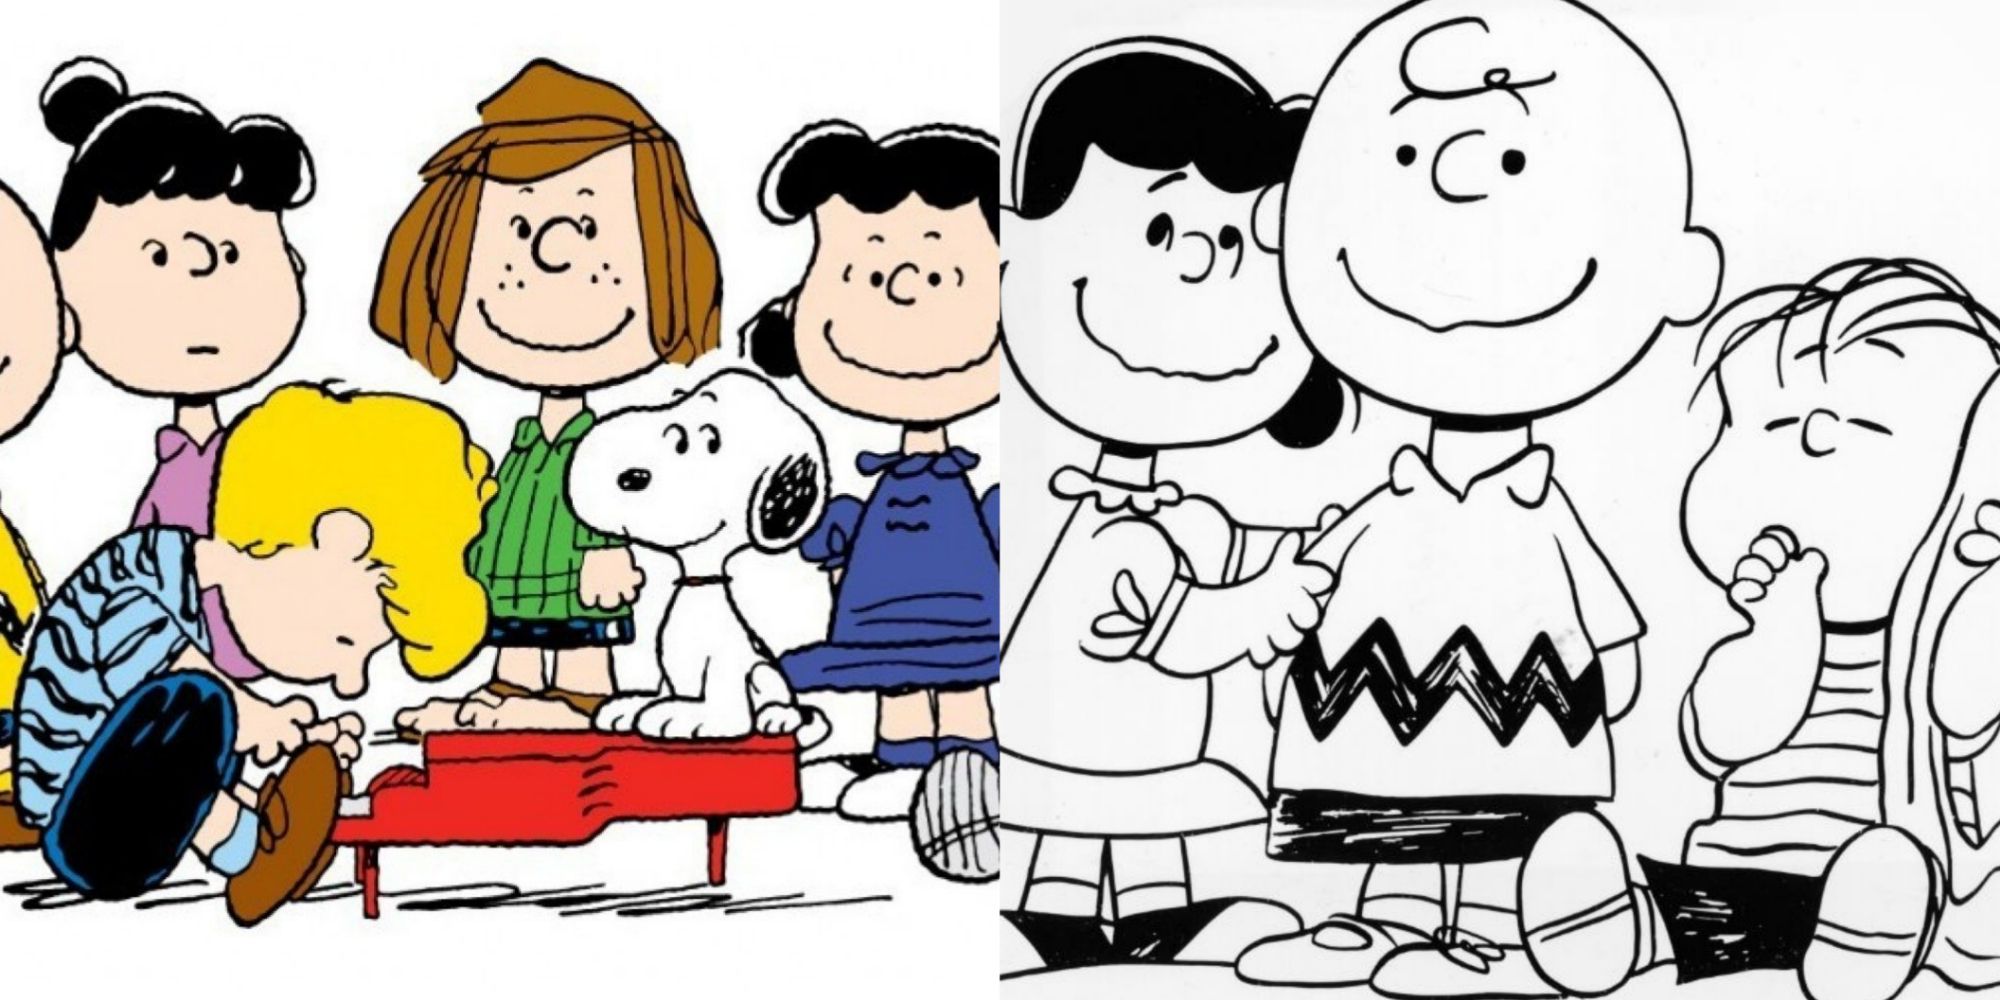 10 Best Peanuts Comic Strips Of All Time